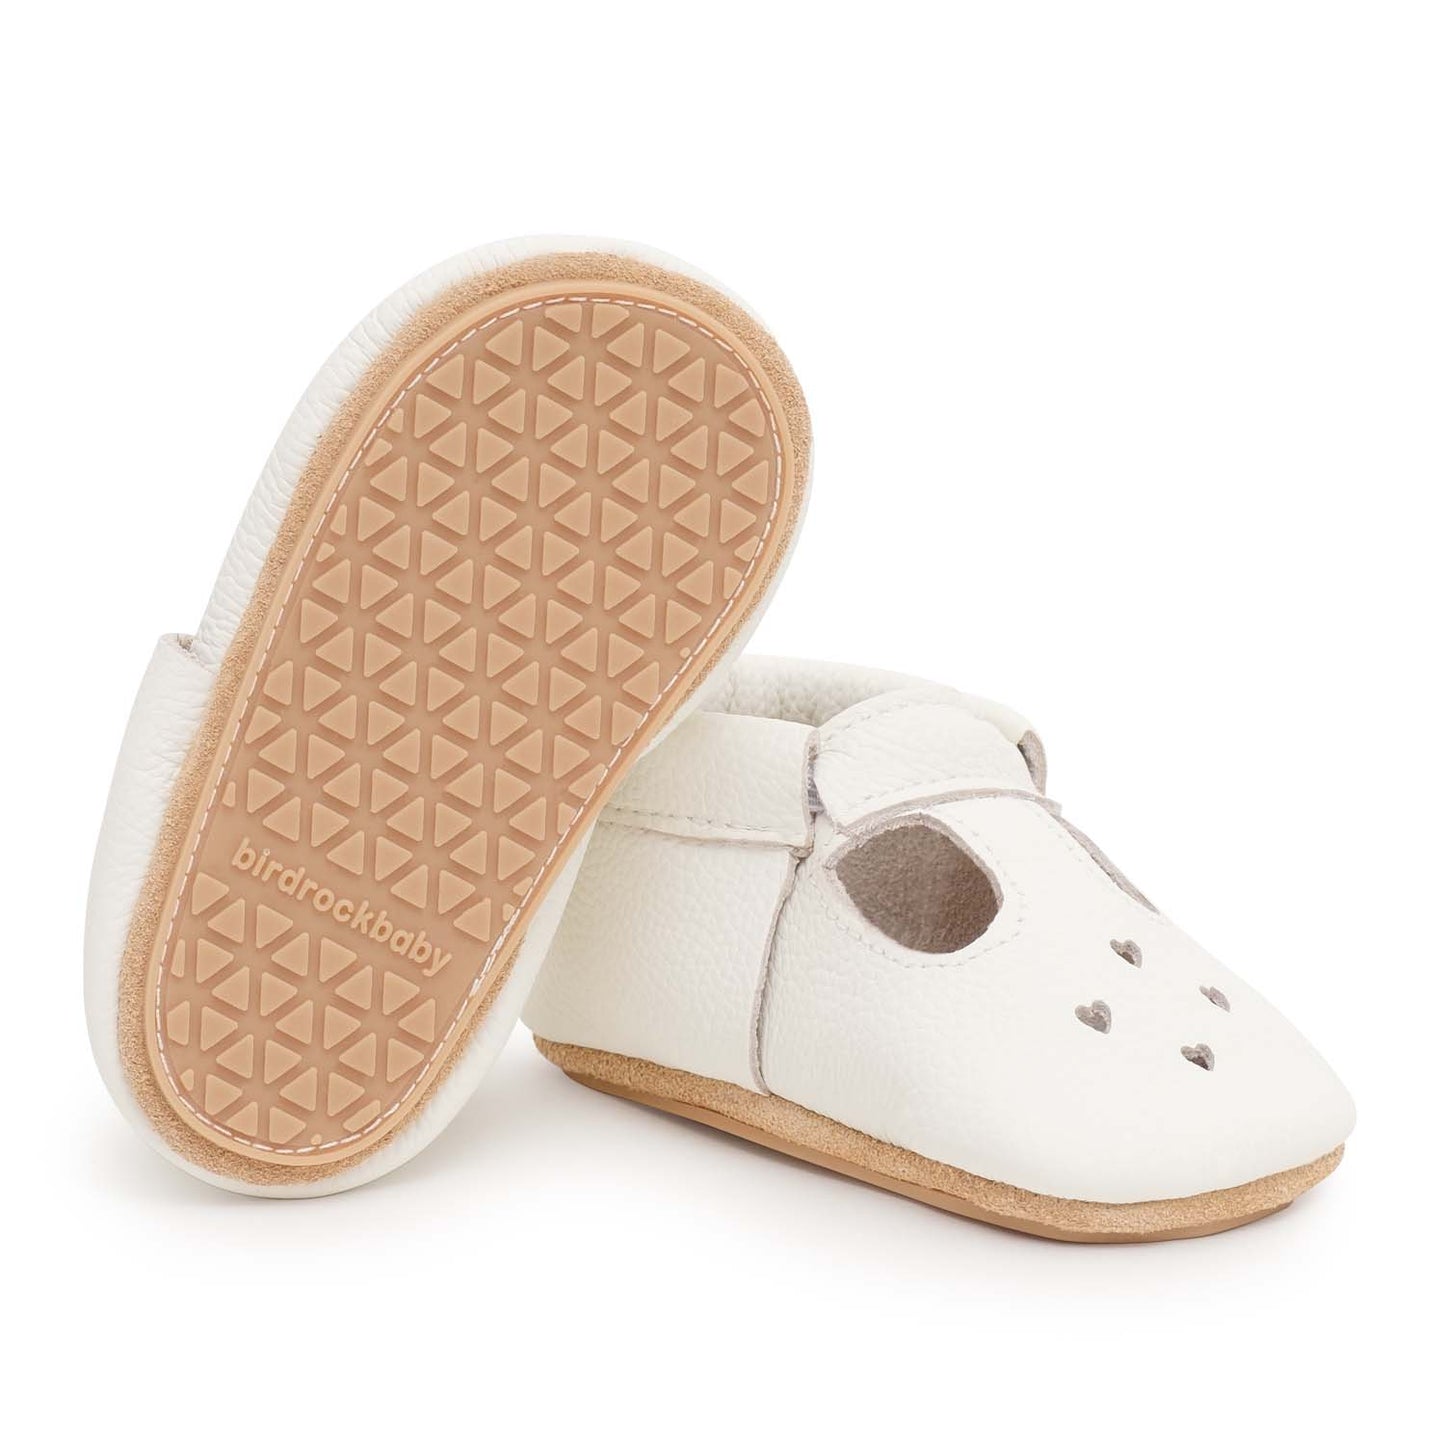 BirdRock Baby - Hard Sole Mary Jane Baby Moccasins -  Baby Shoes Pearl White